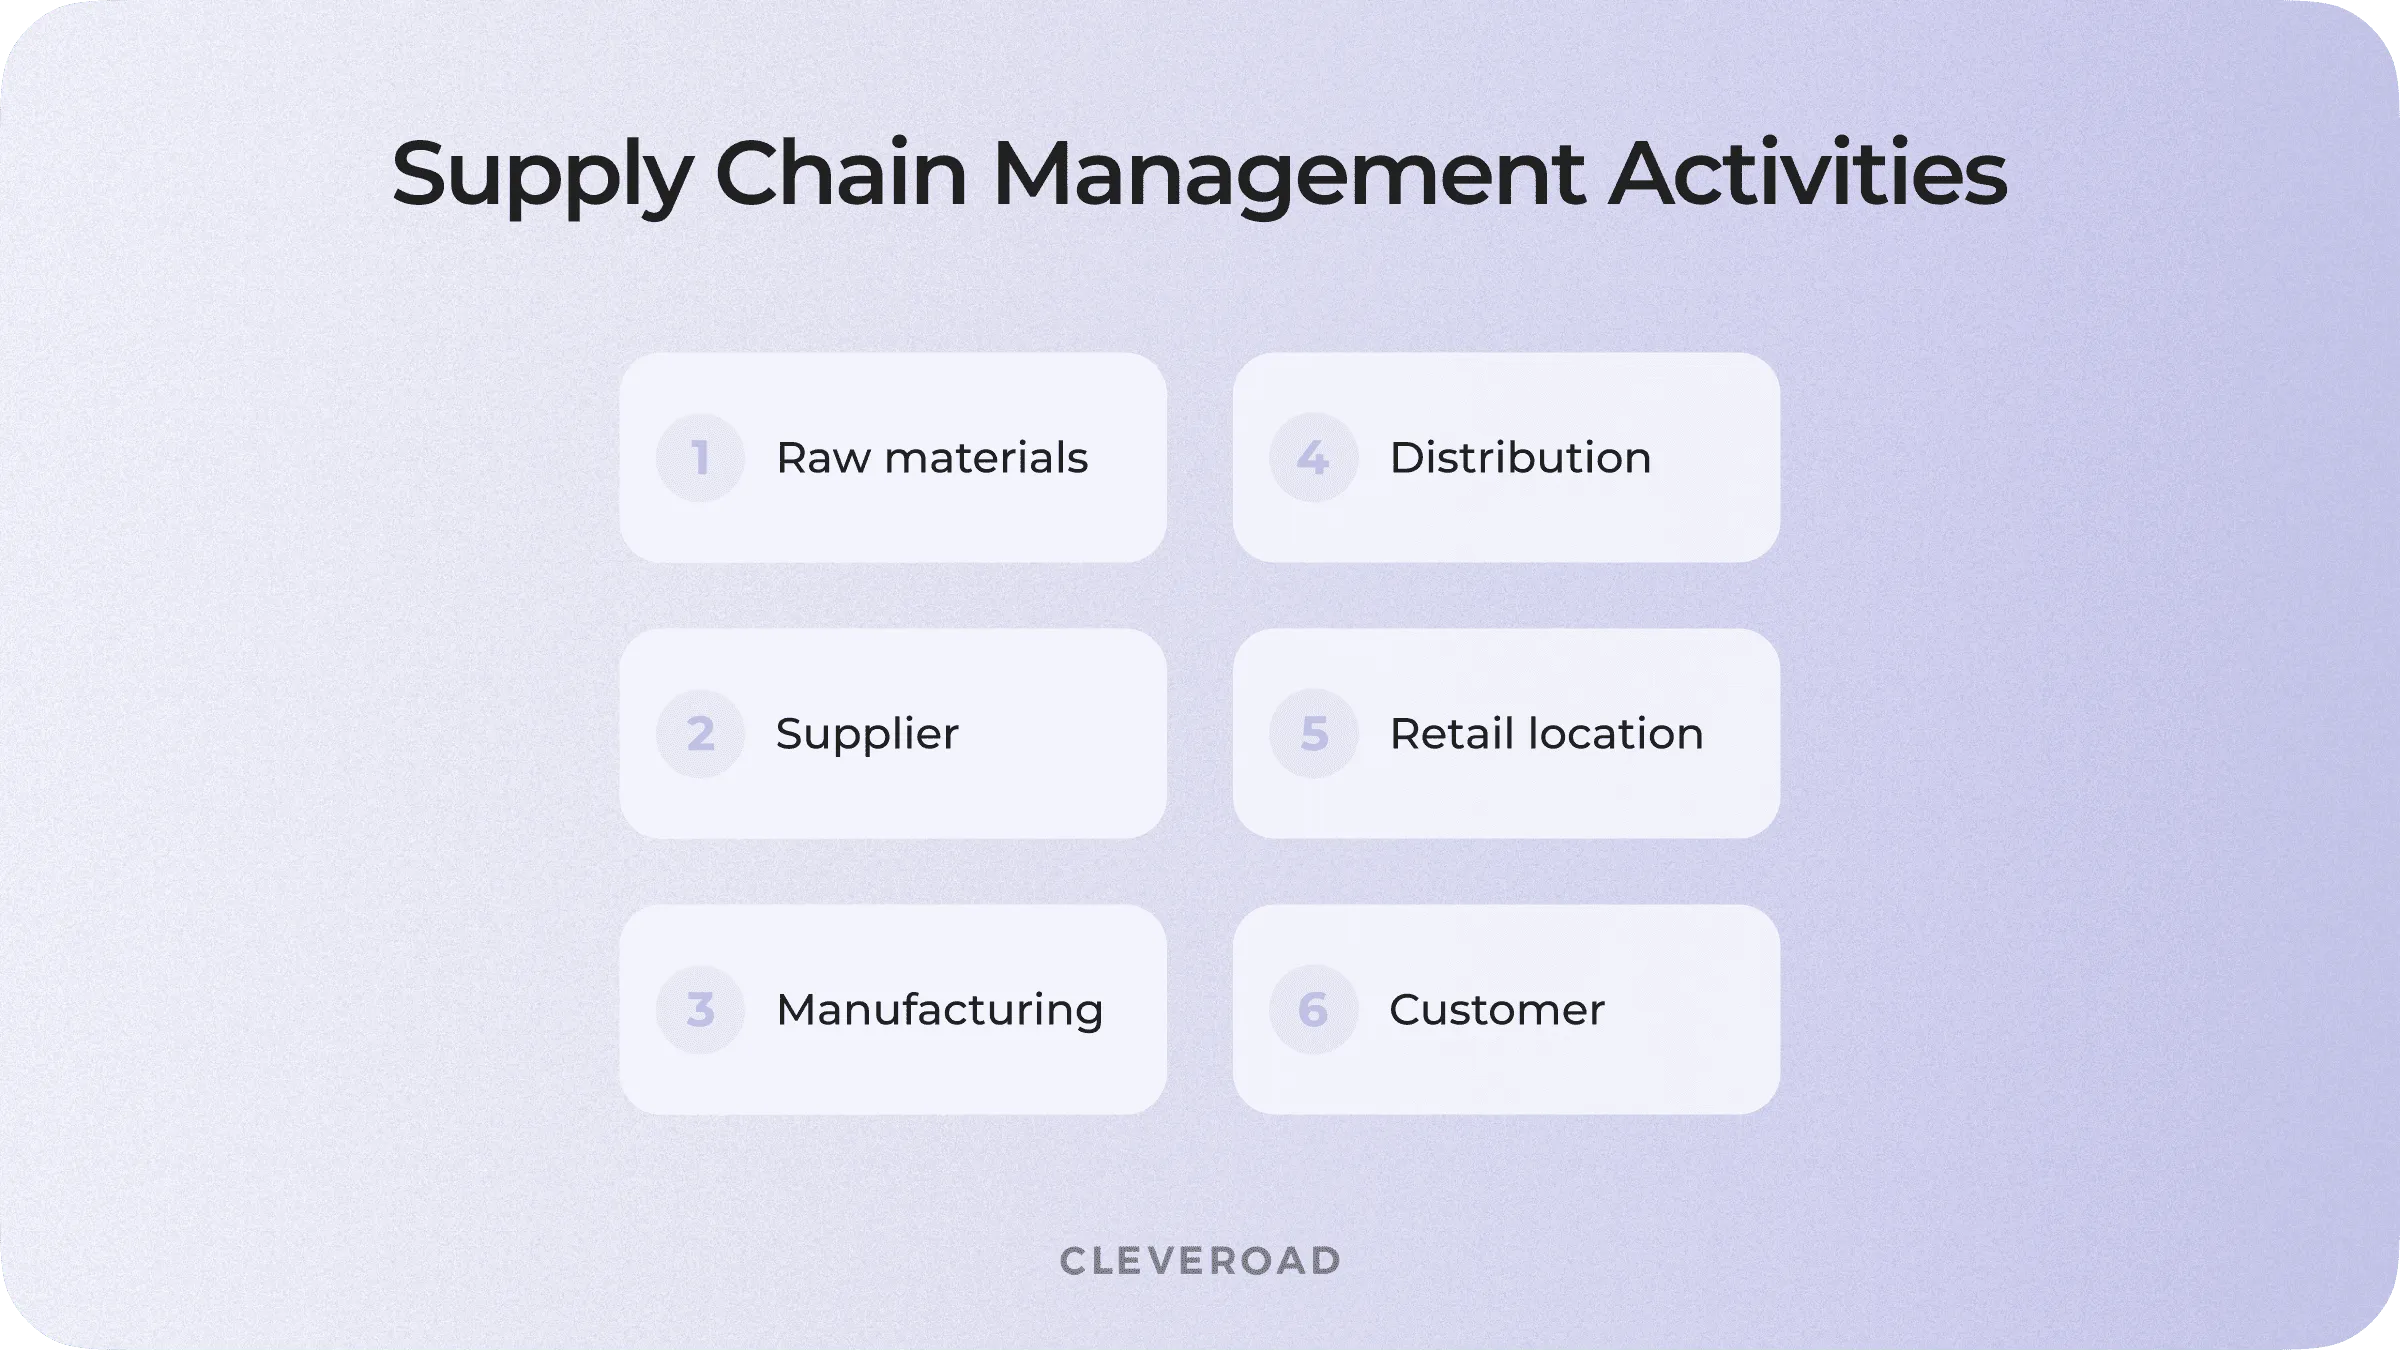 The variety of the supply chain activities